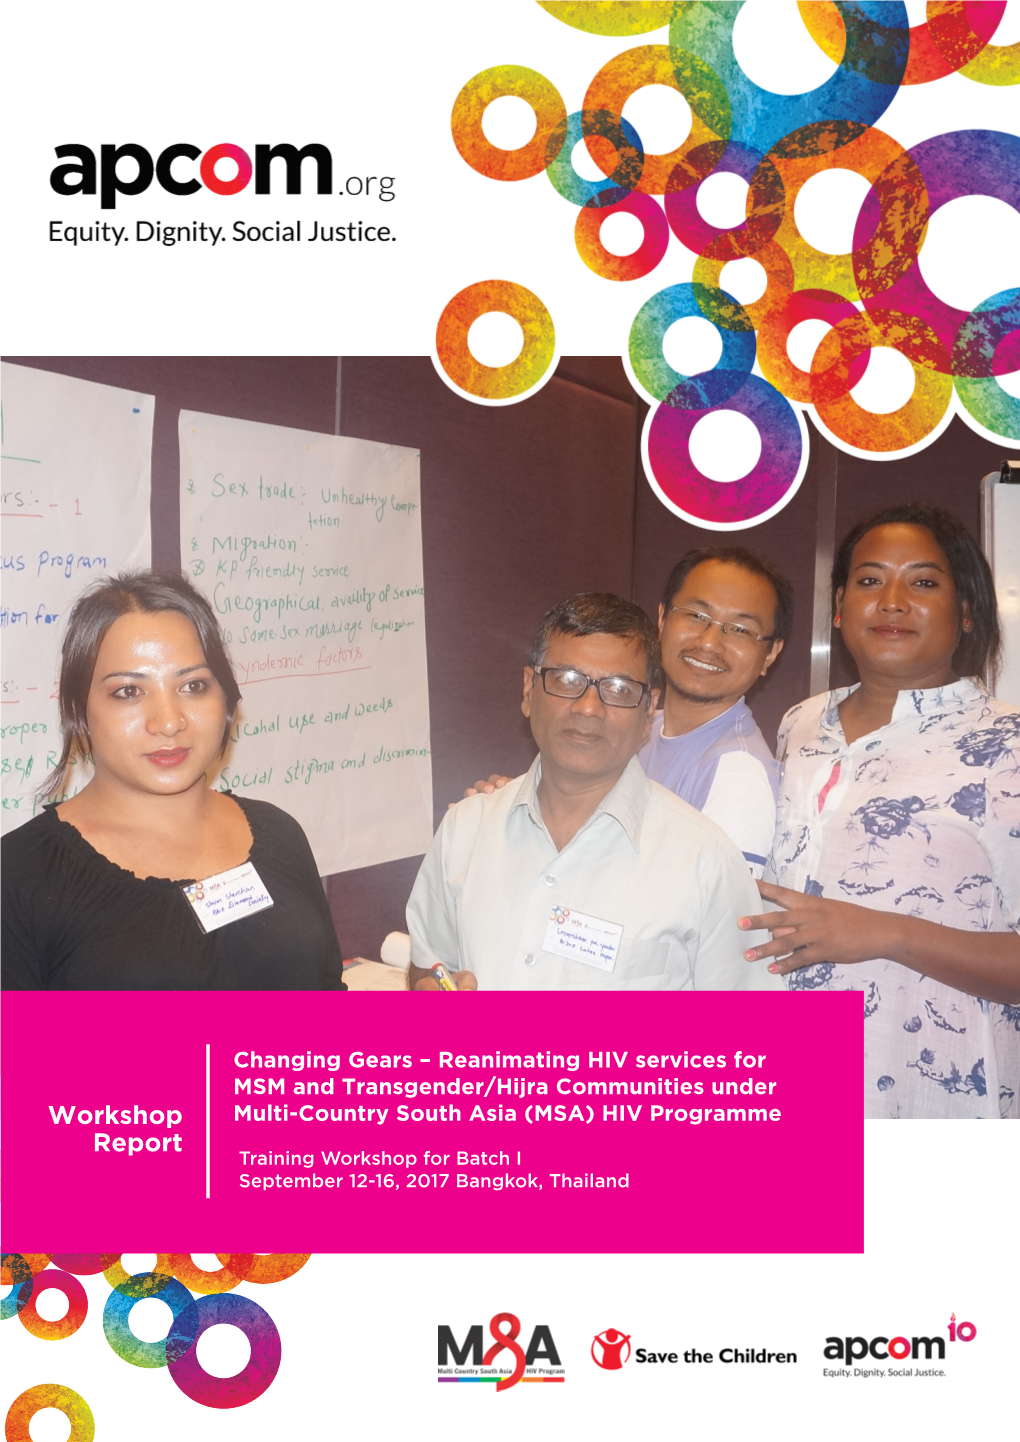 Workshop Report: Changing Gears - Reanimating HIV Services for MSM and Transgender/Hijra Communities Under Multi-Country South Asia (MSA) HIV Programme